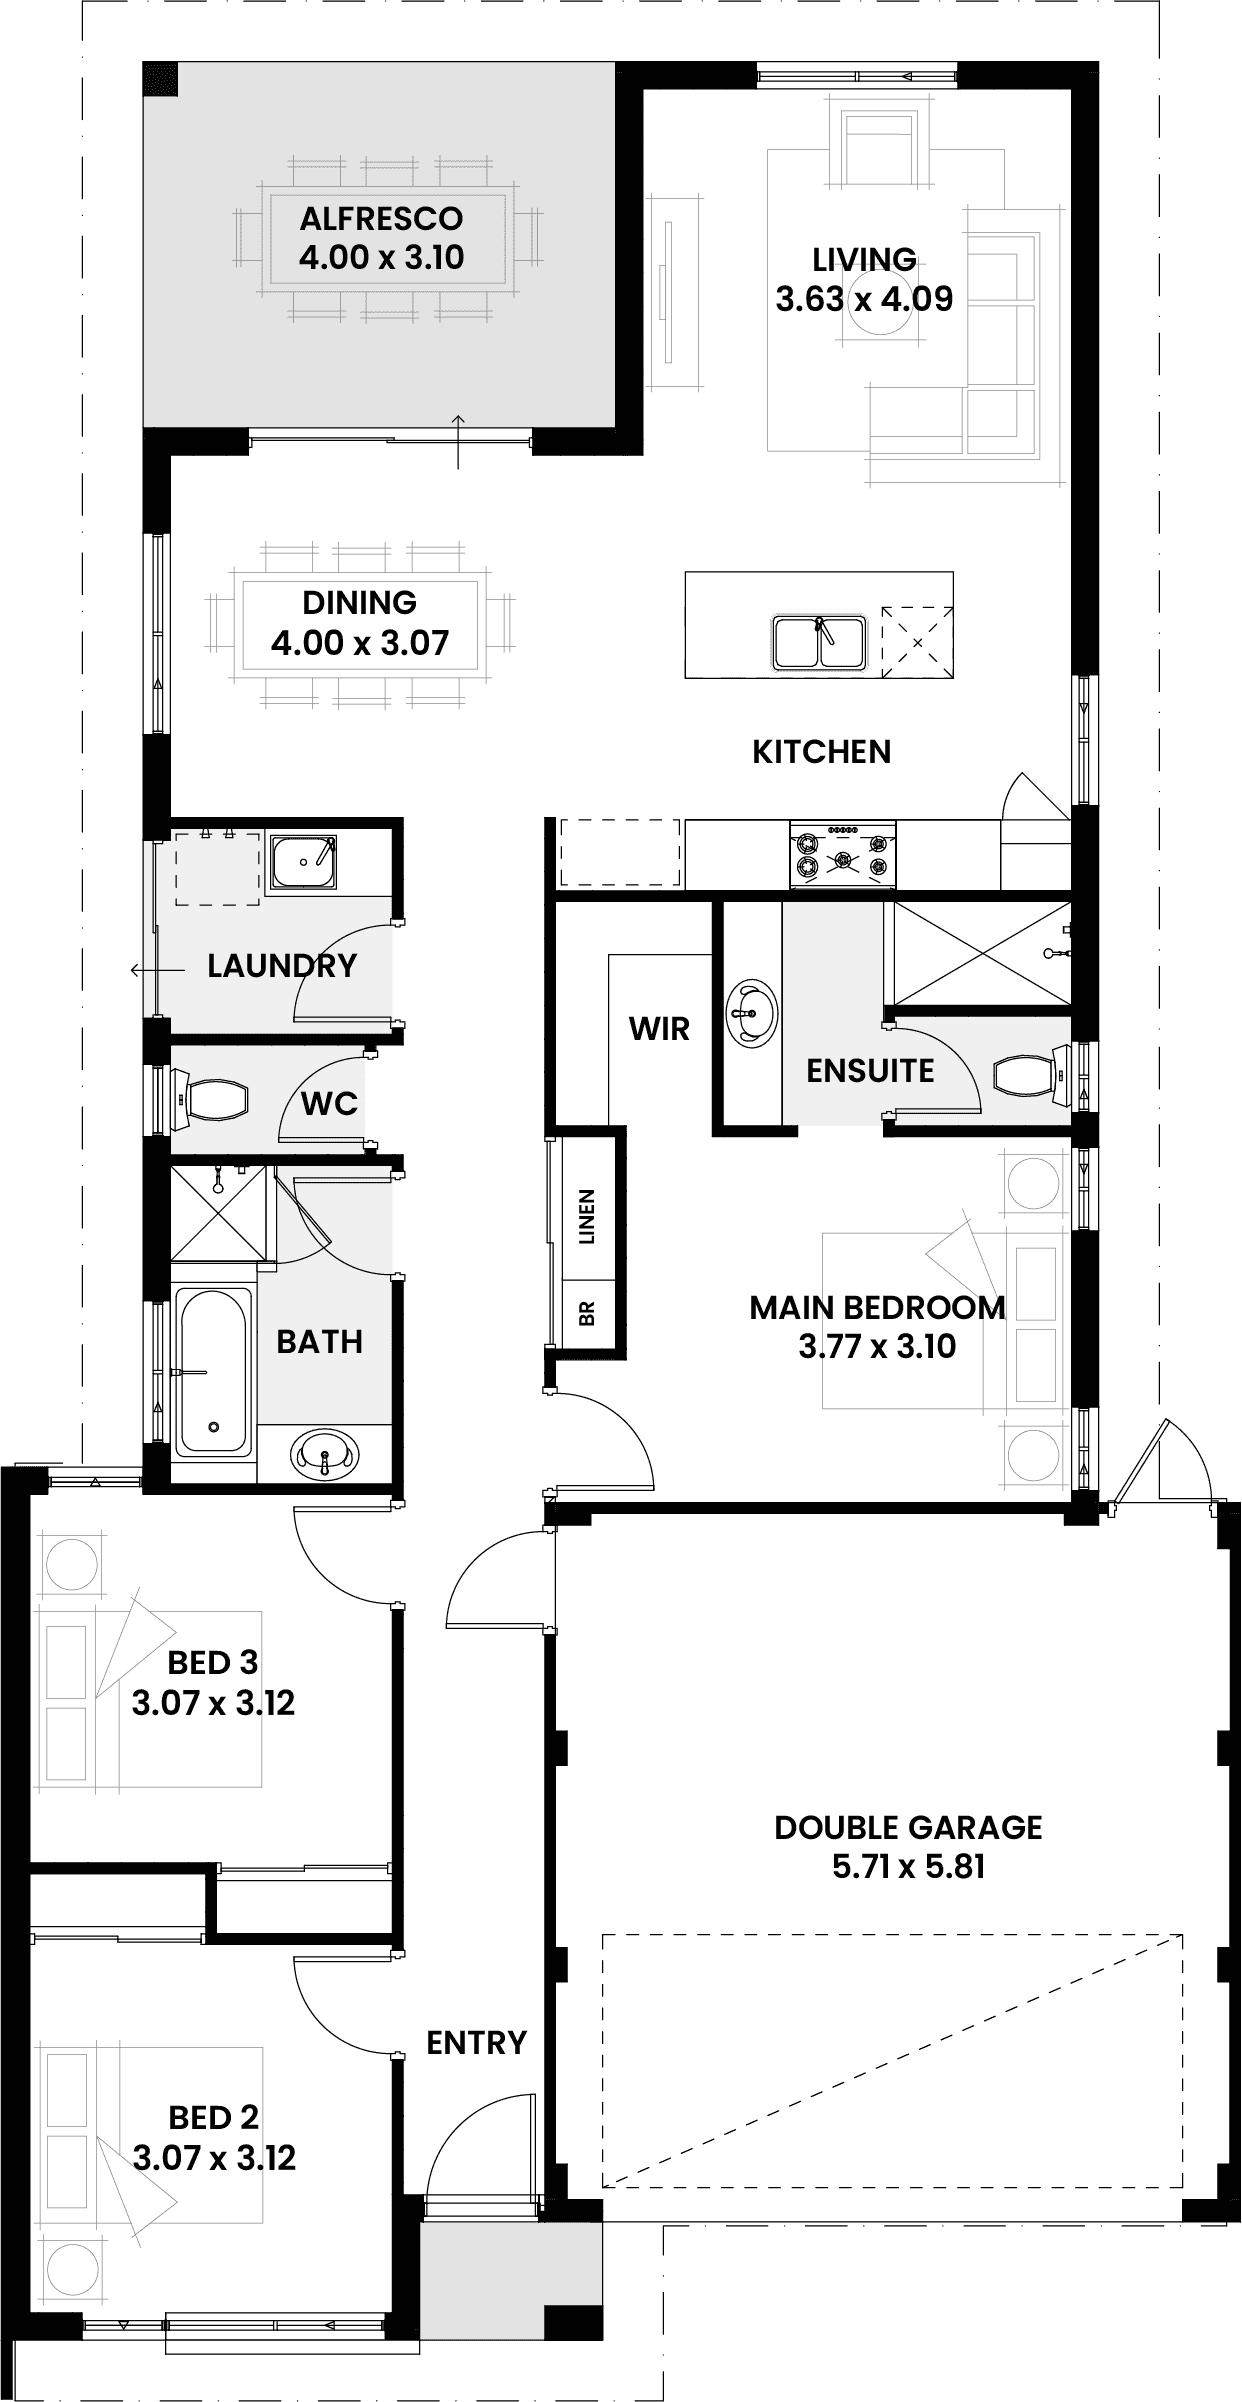 Floorplan for The Rowan, a Move Homes new home design perfect for first time buyers and new builders in Perth